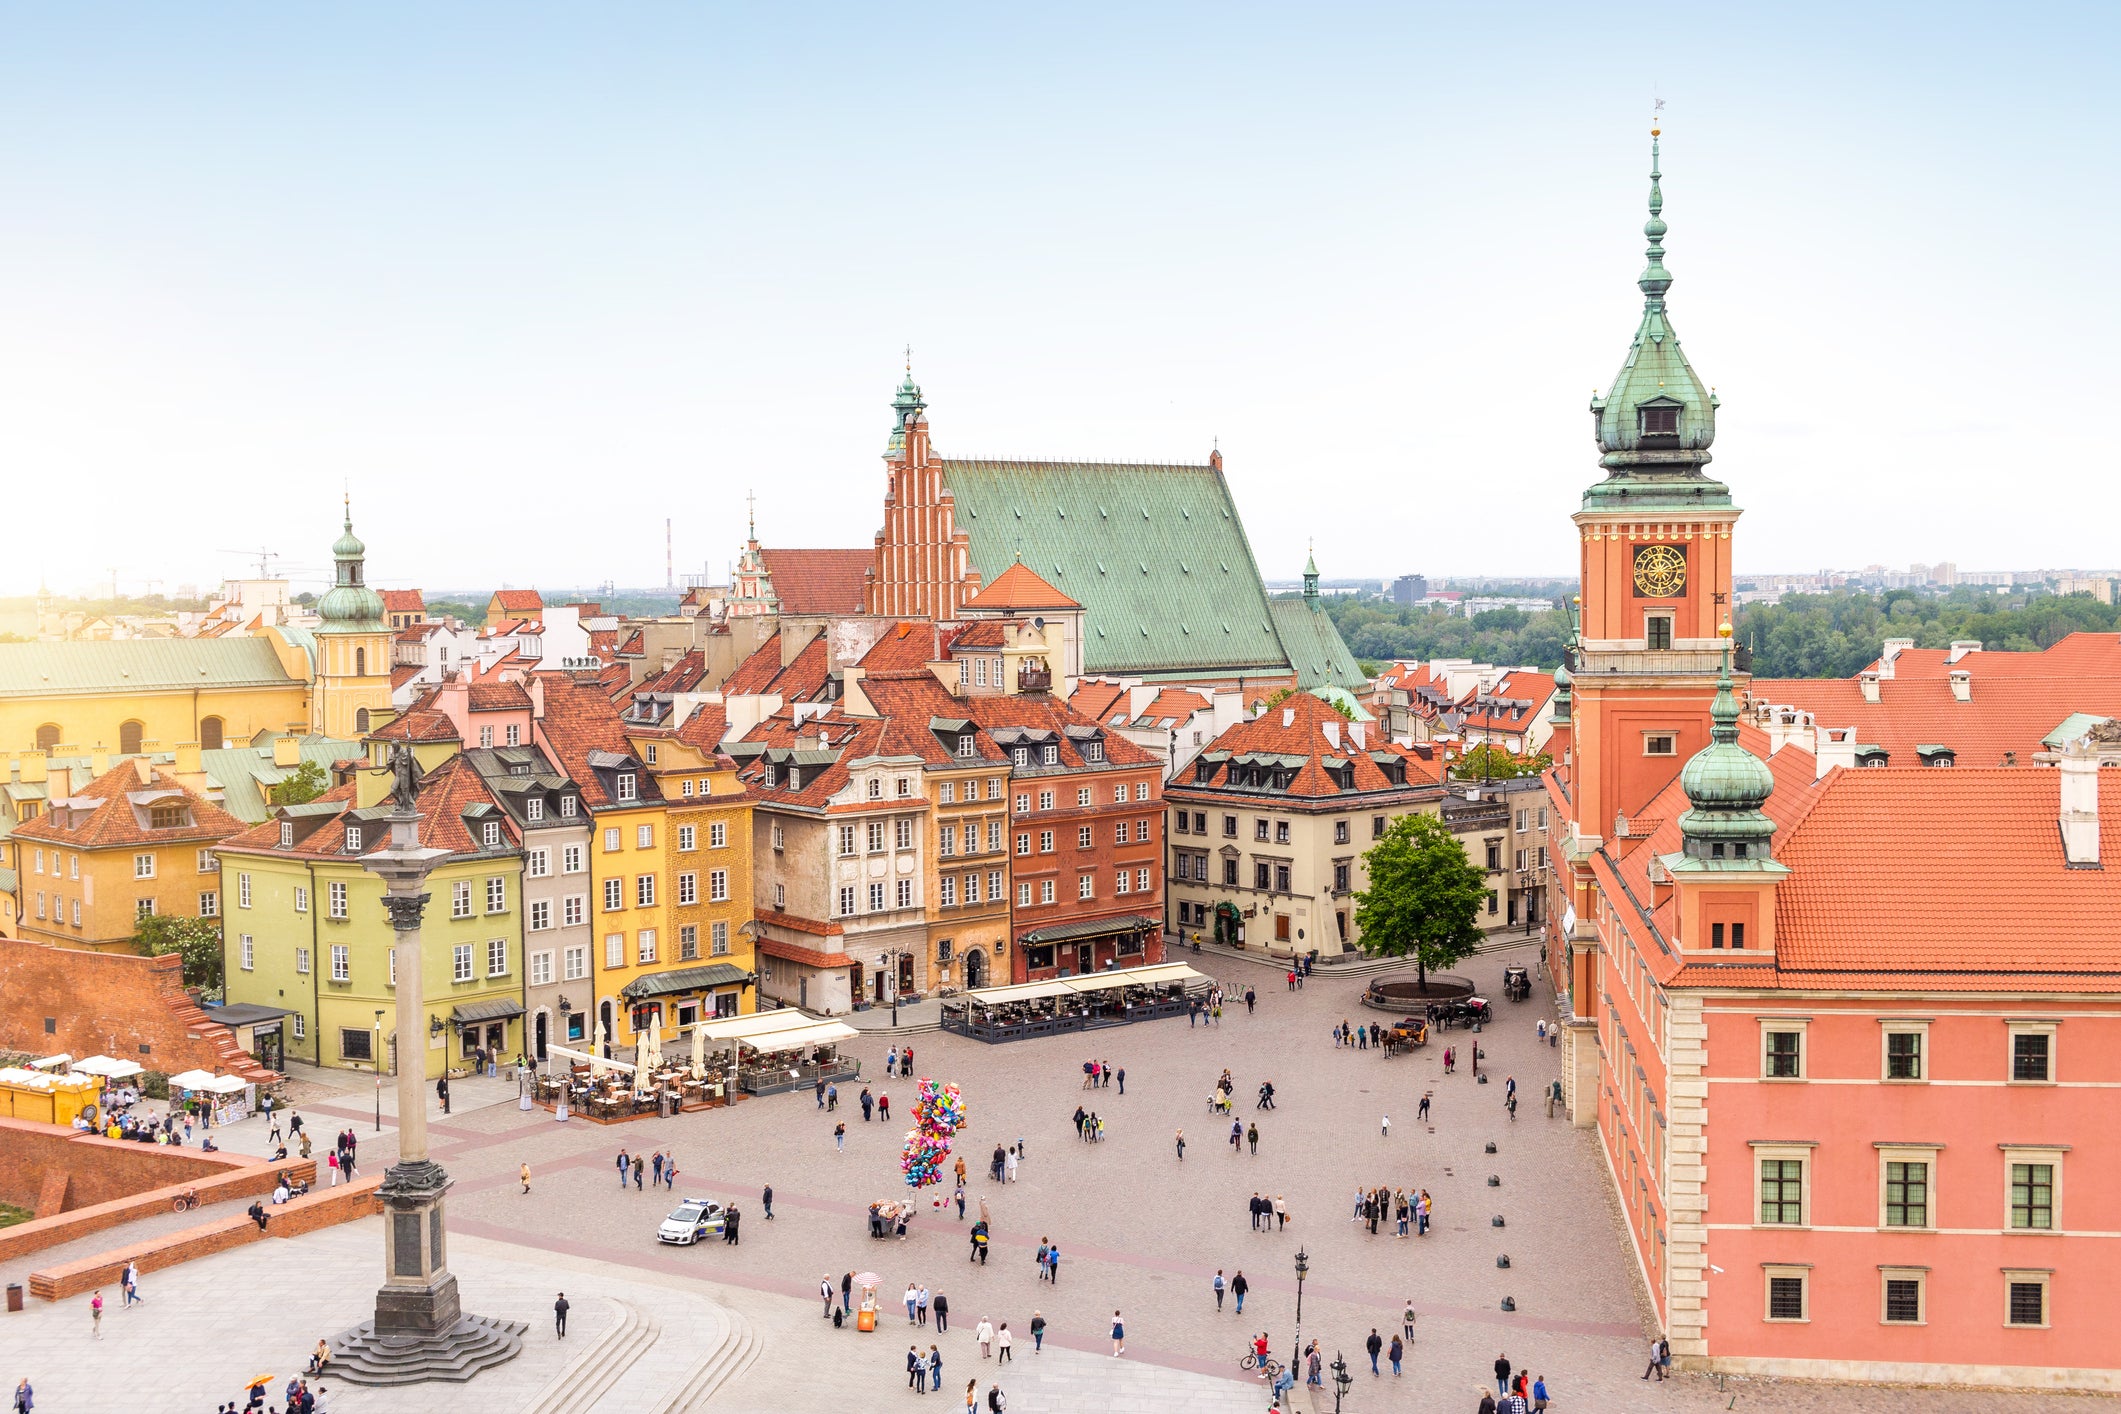 Tourist hub: the Old Town in Warsaw, Poland